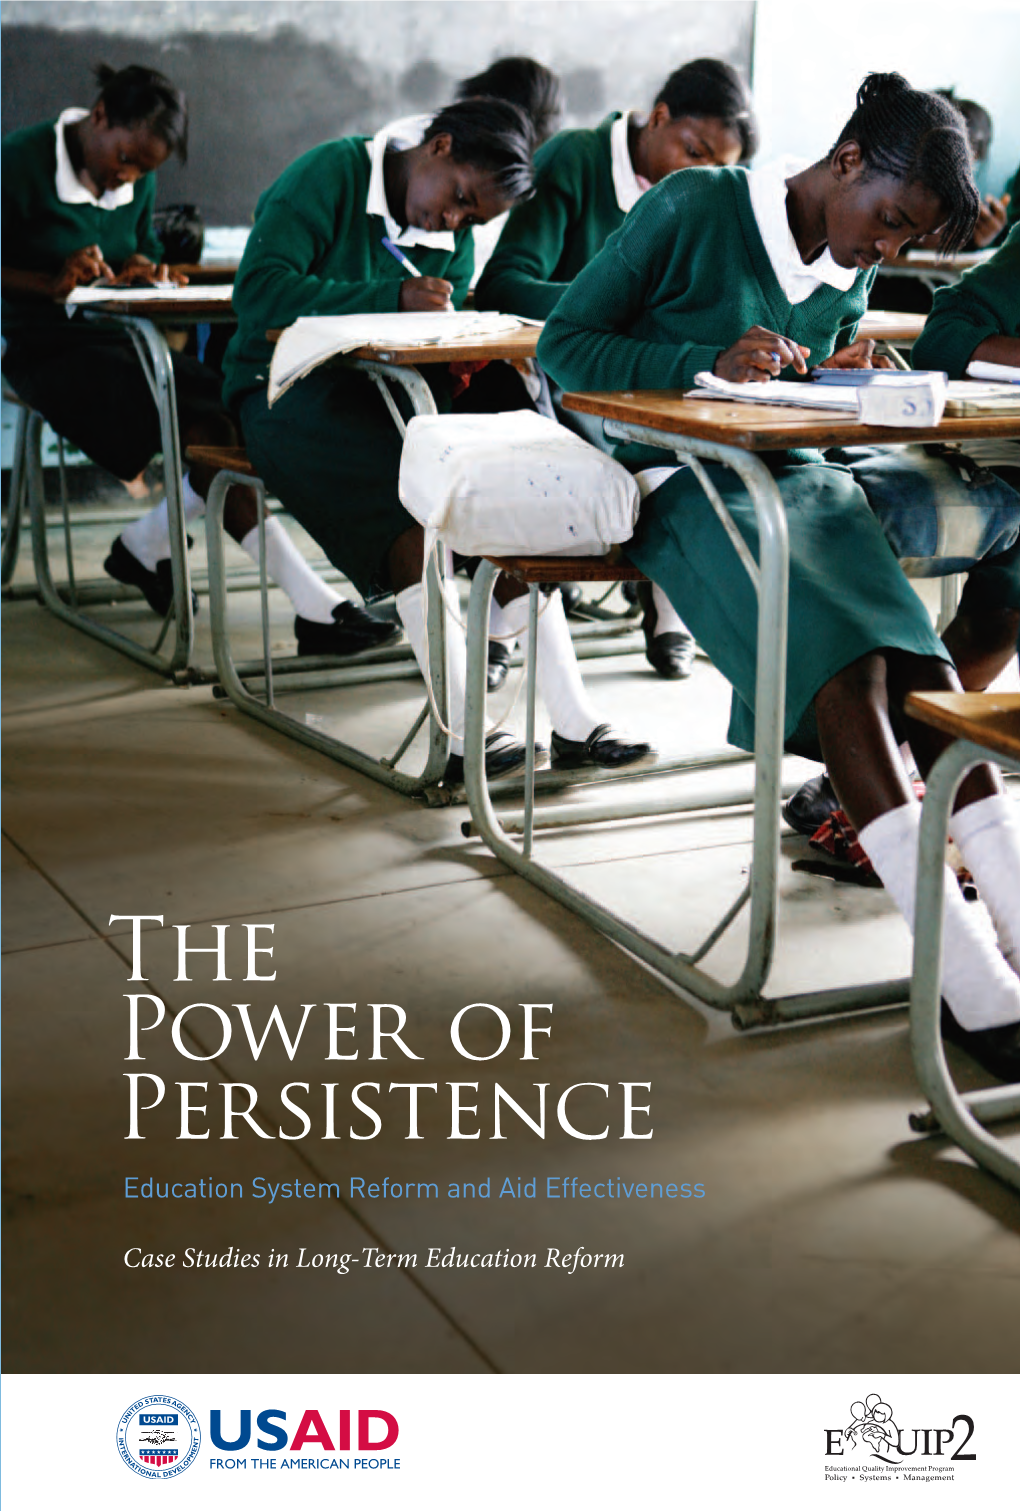 The Power of Persistence: Education System Reform and Aid Effectiveness